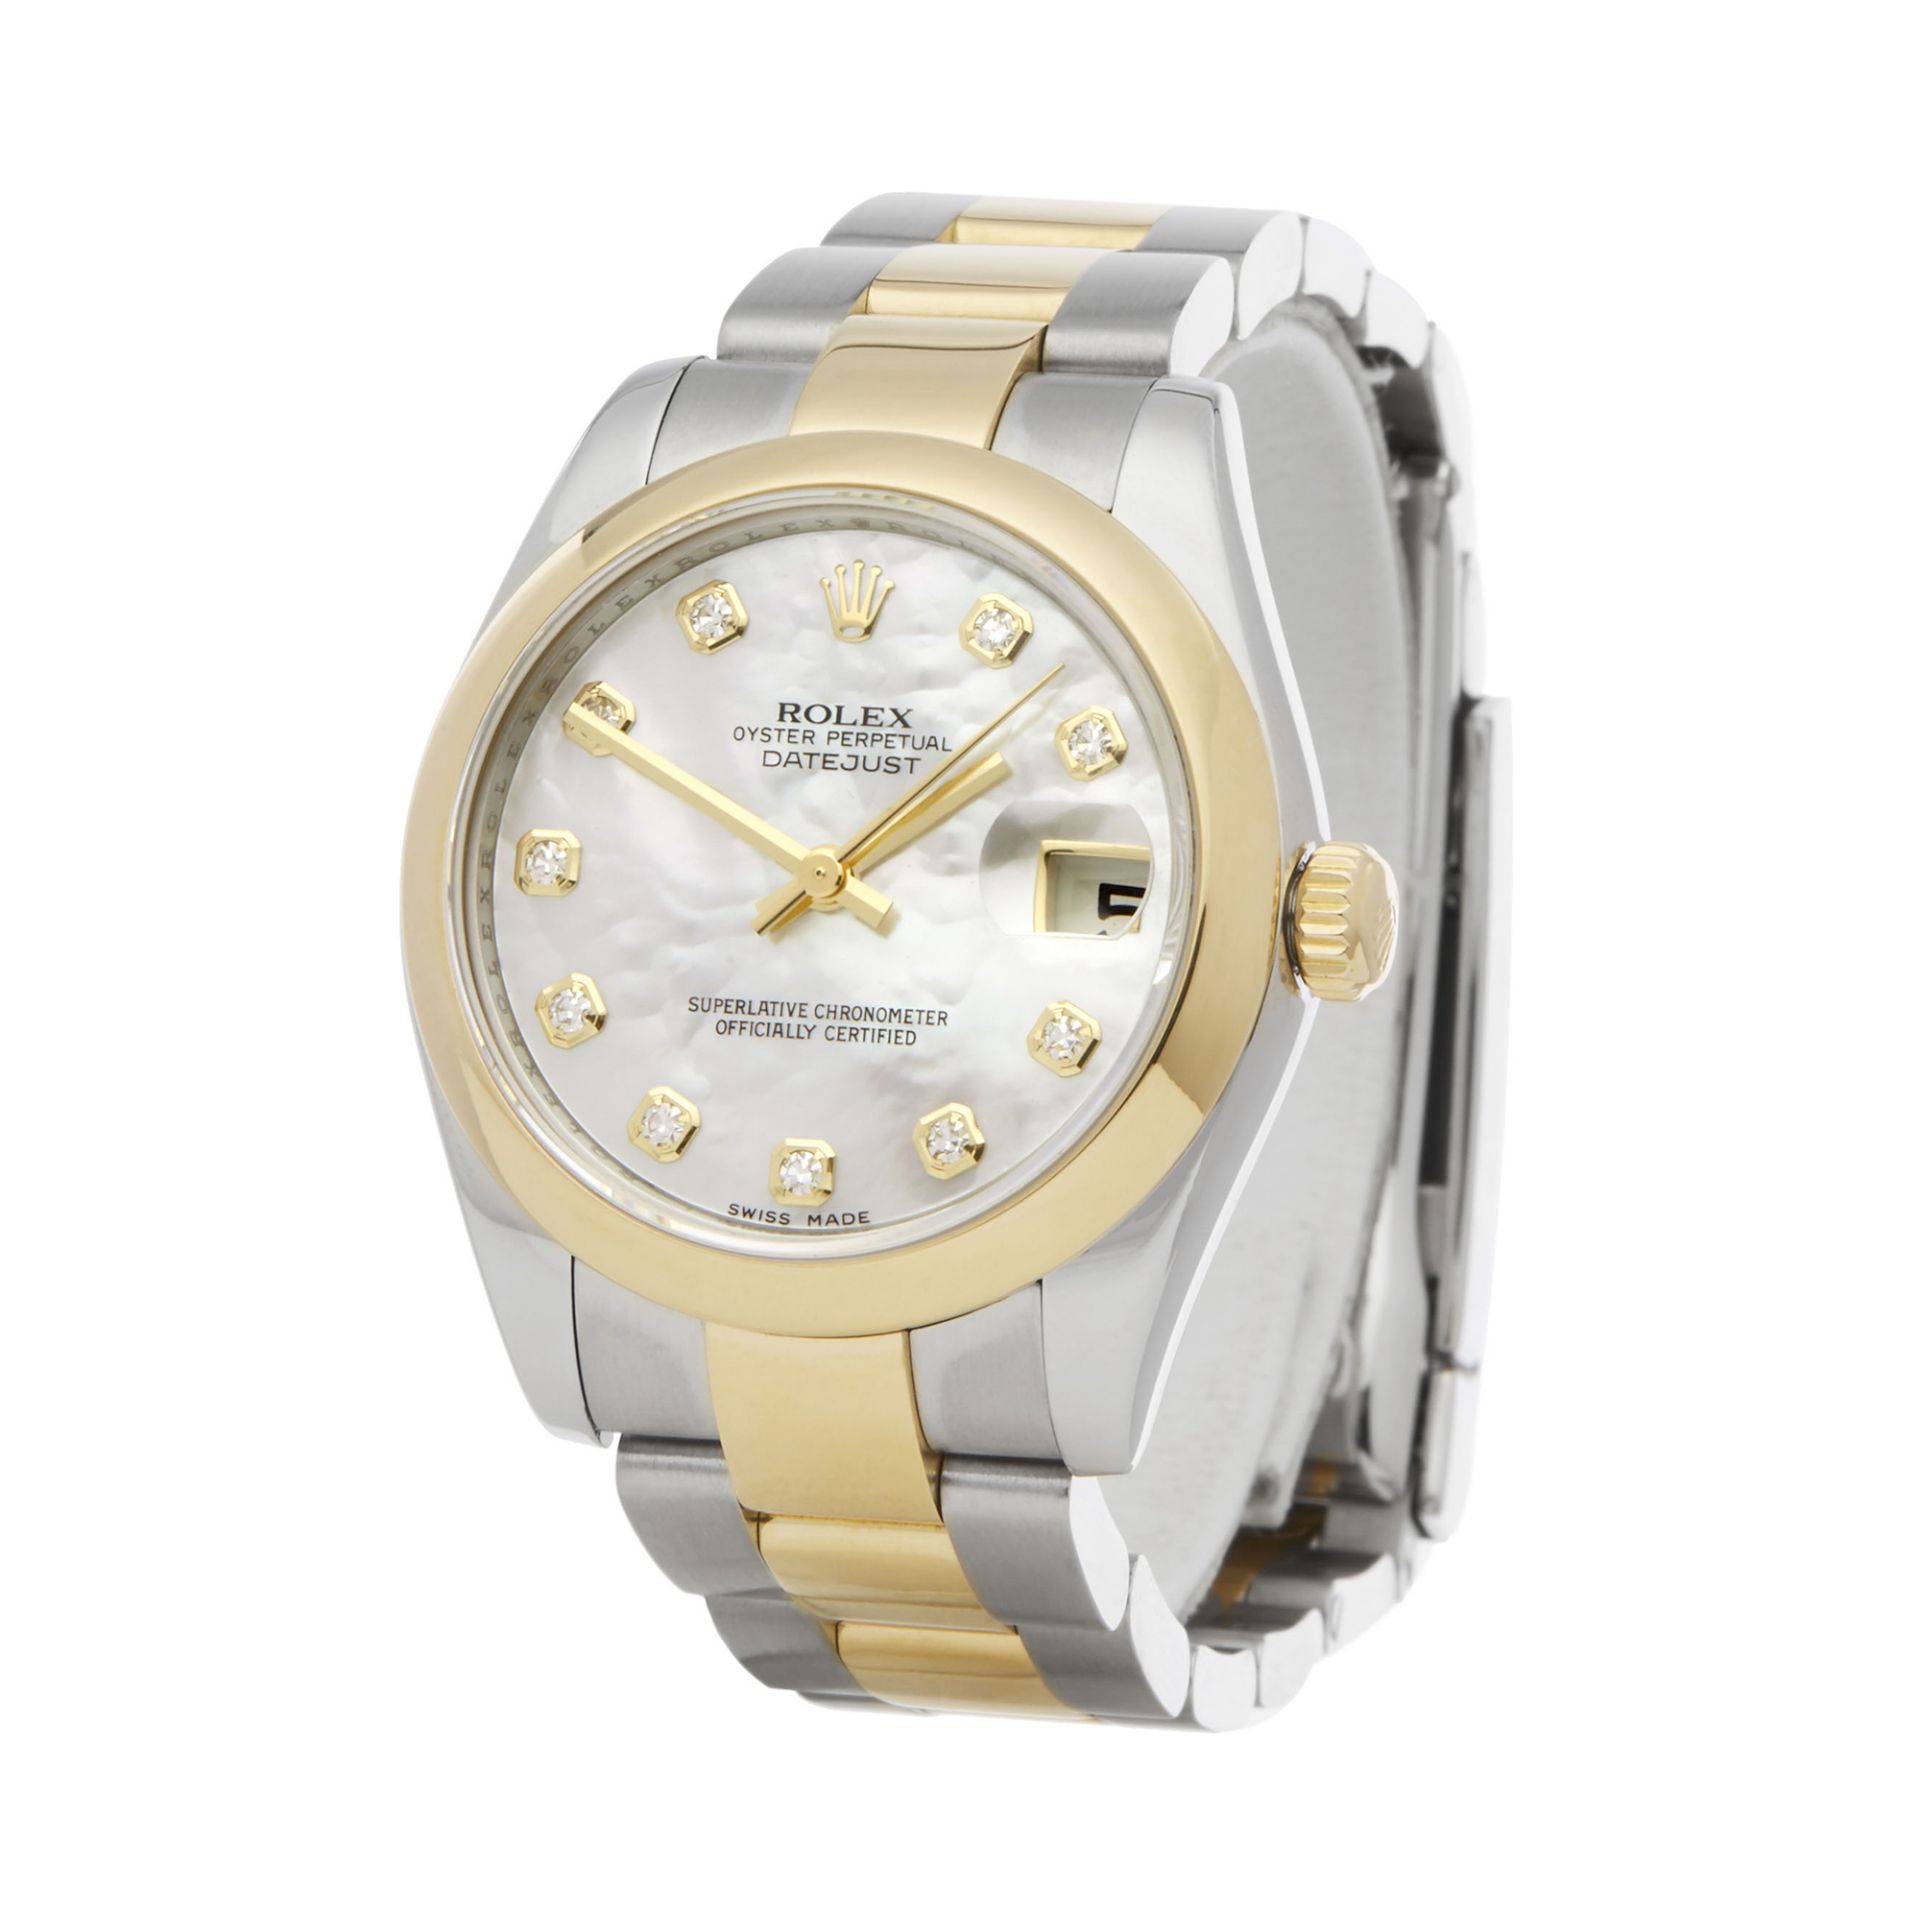 2007 Datejust 31 Mother of Pearl Diamond Stainless Steel & Yellow Gold - 178243